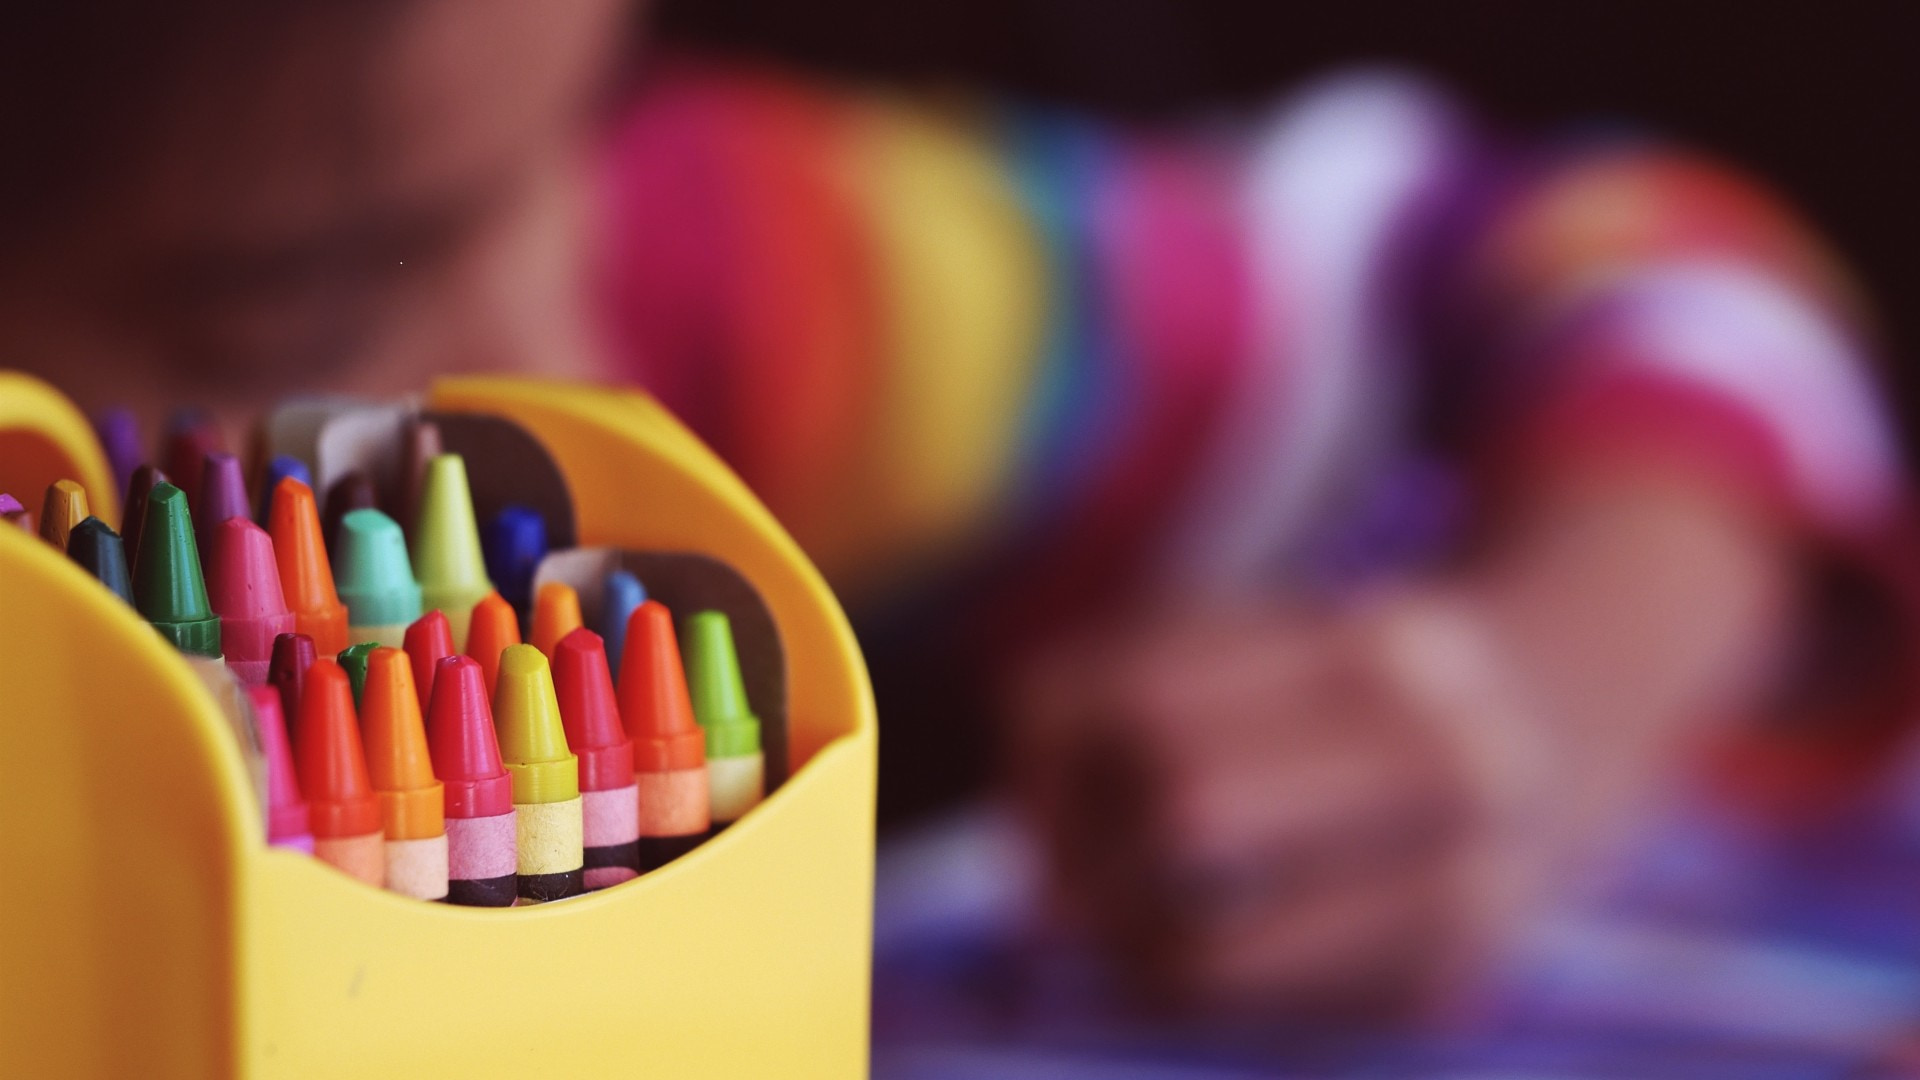 An image of a colourful box of crayons, with a child seen drawing in the background. Photo: Aaron Burden/Unsplash